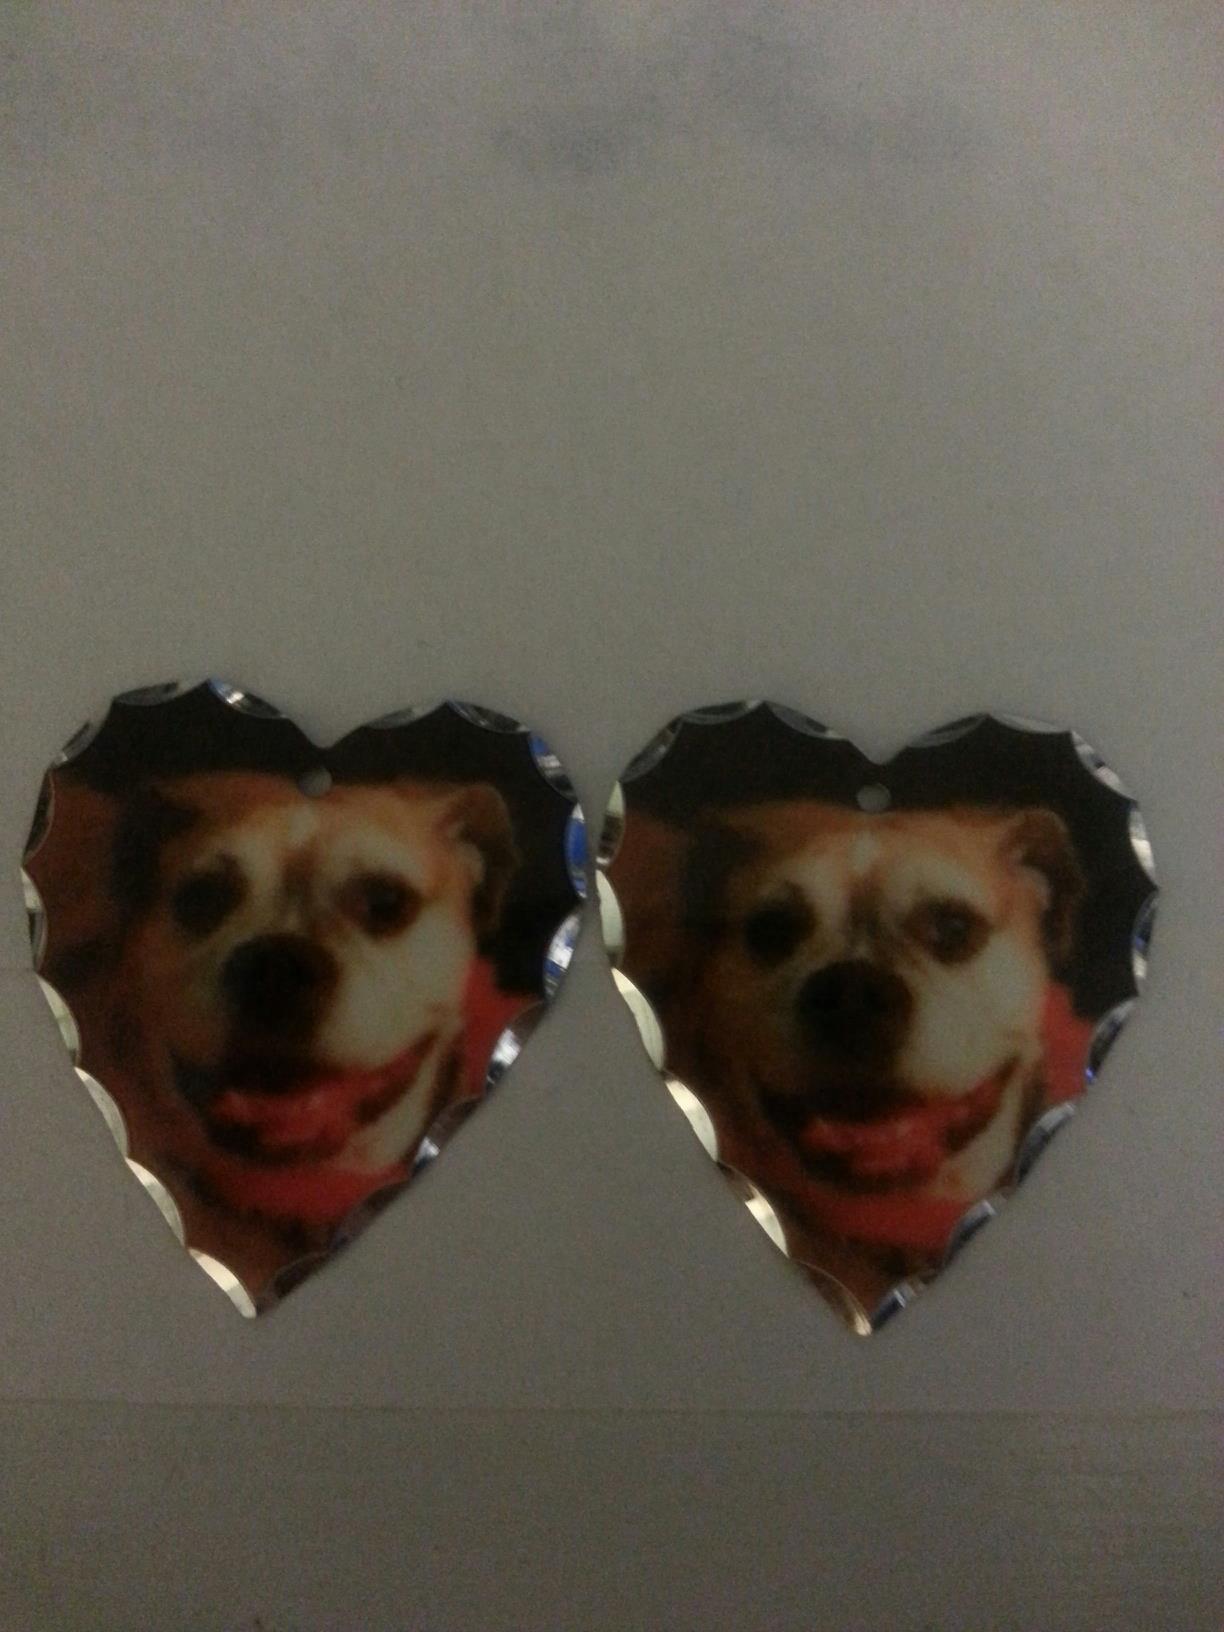 Unisub Heart Earrings made with sublimation printing